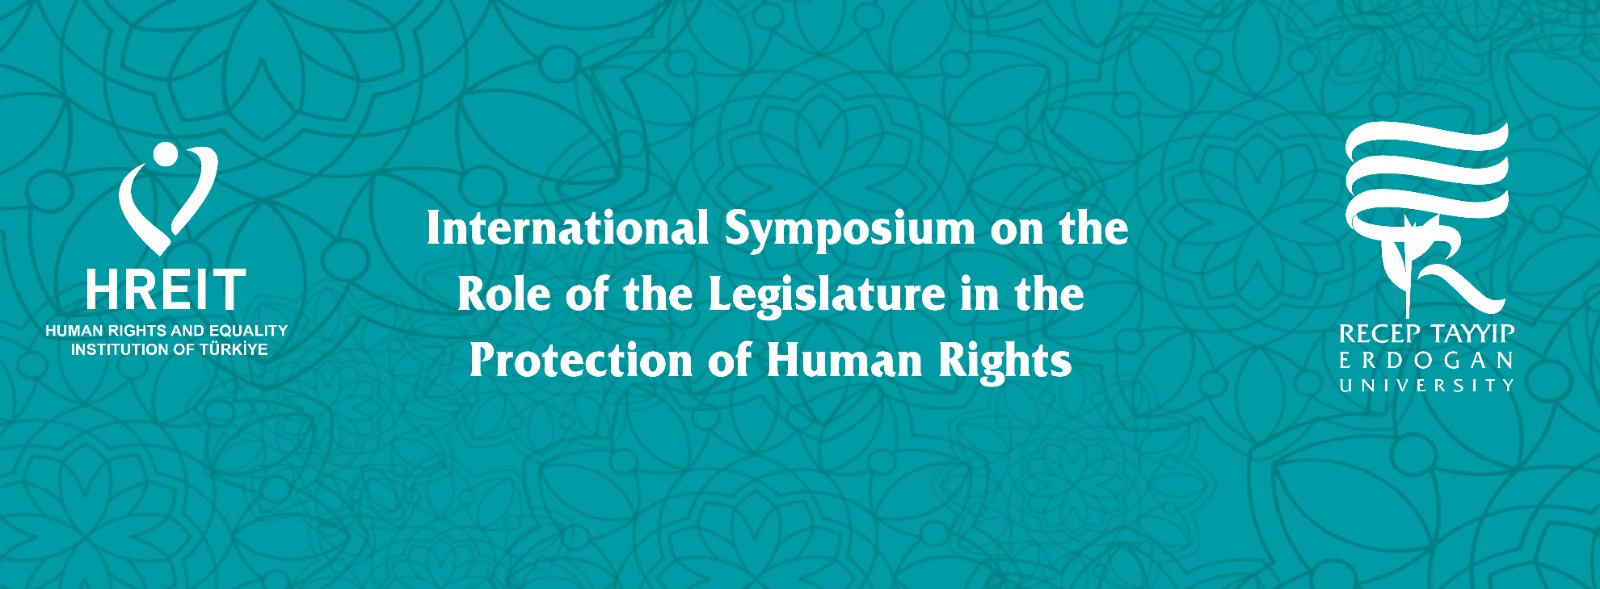 International Symposium on the Role of the Legislature in the Protection of Human Rights